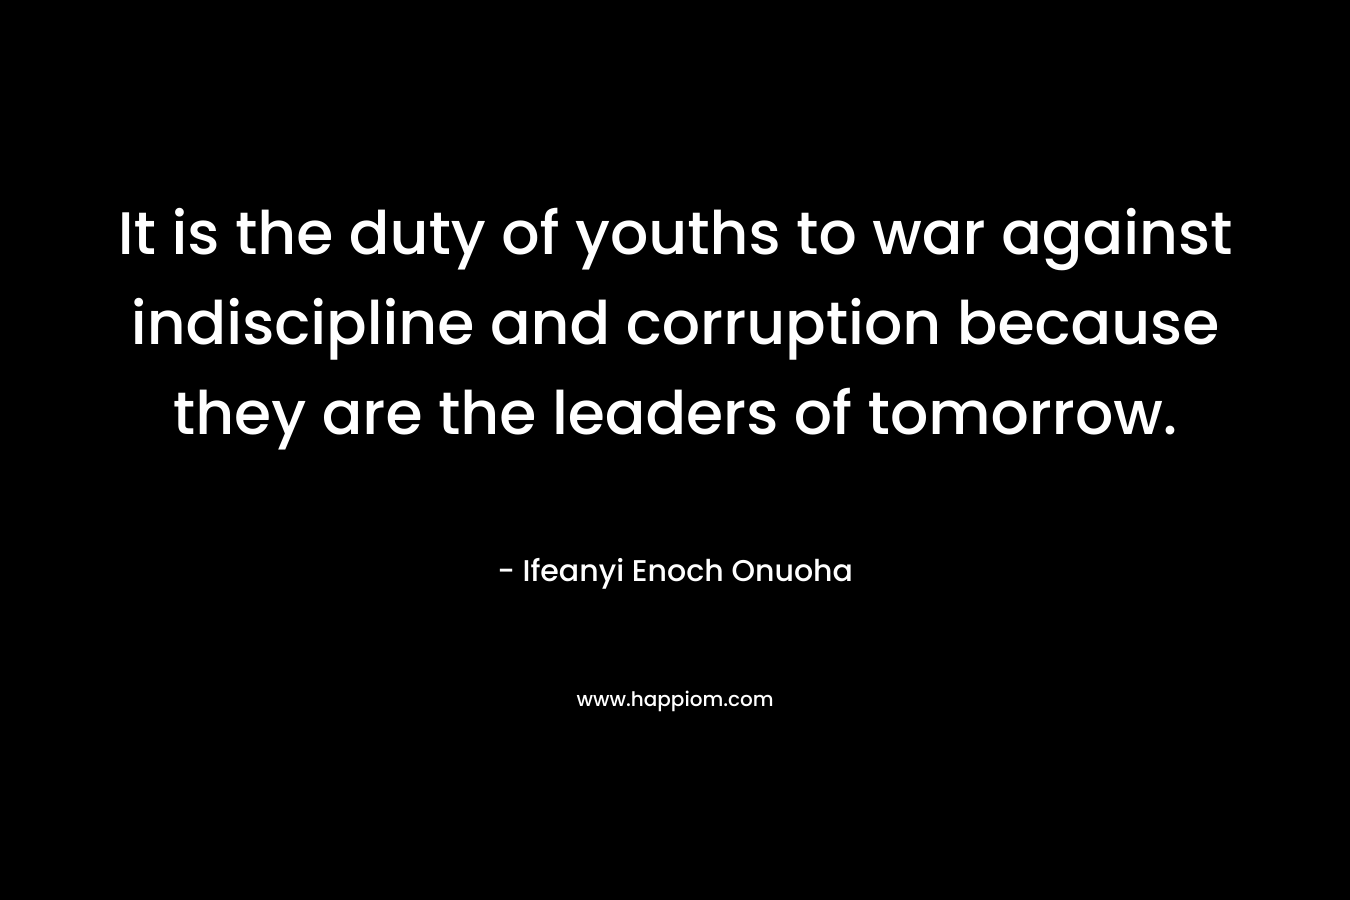 It is the duty of youths to war against indiscipline and corruption because they are the leaders of tomorrow.